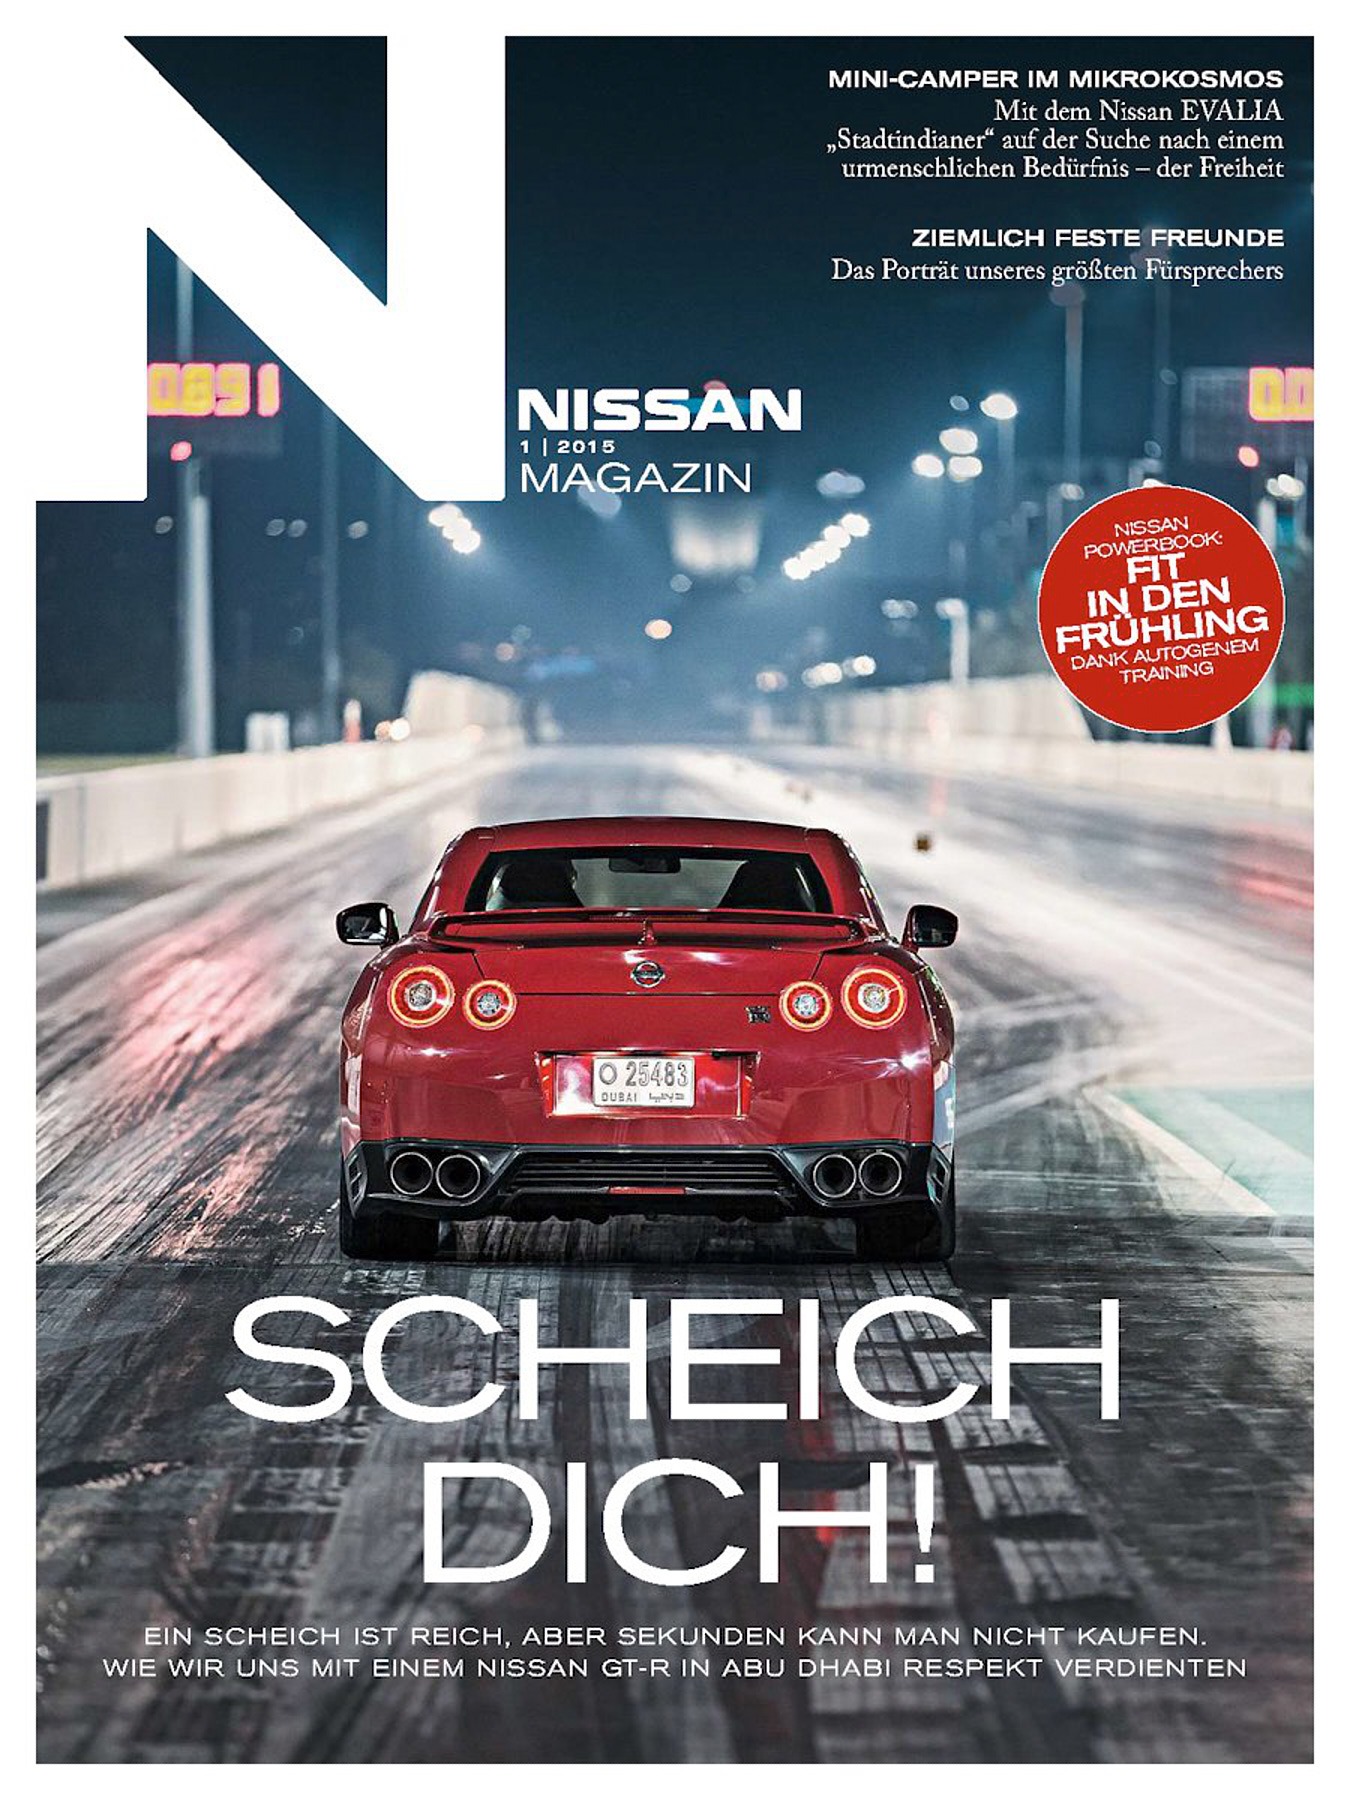 nissan magazine scheich dich coverstory dubai (11 images) by Mike Meyer Photography